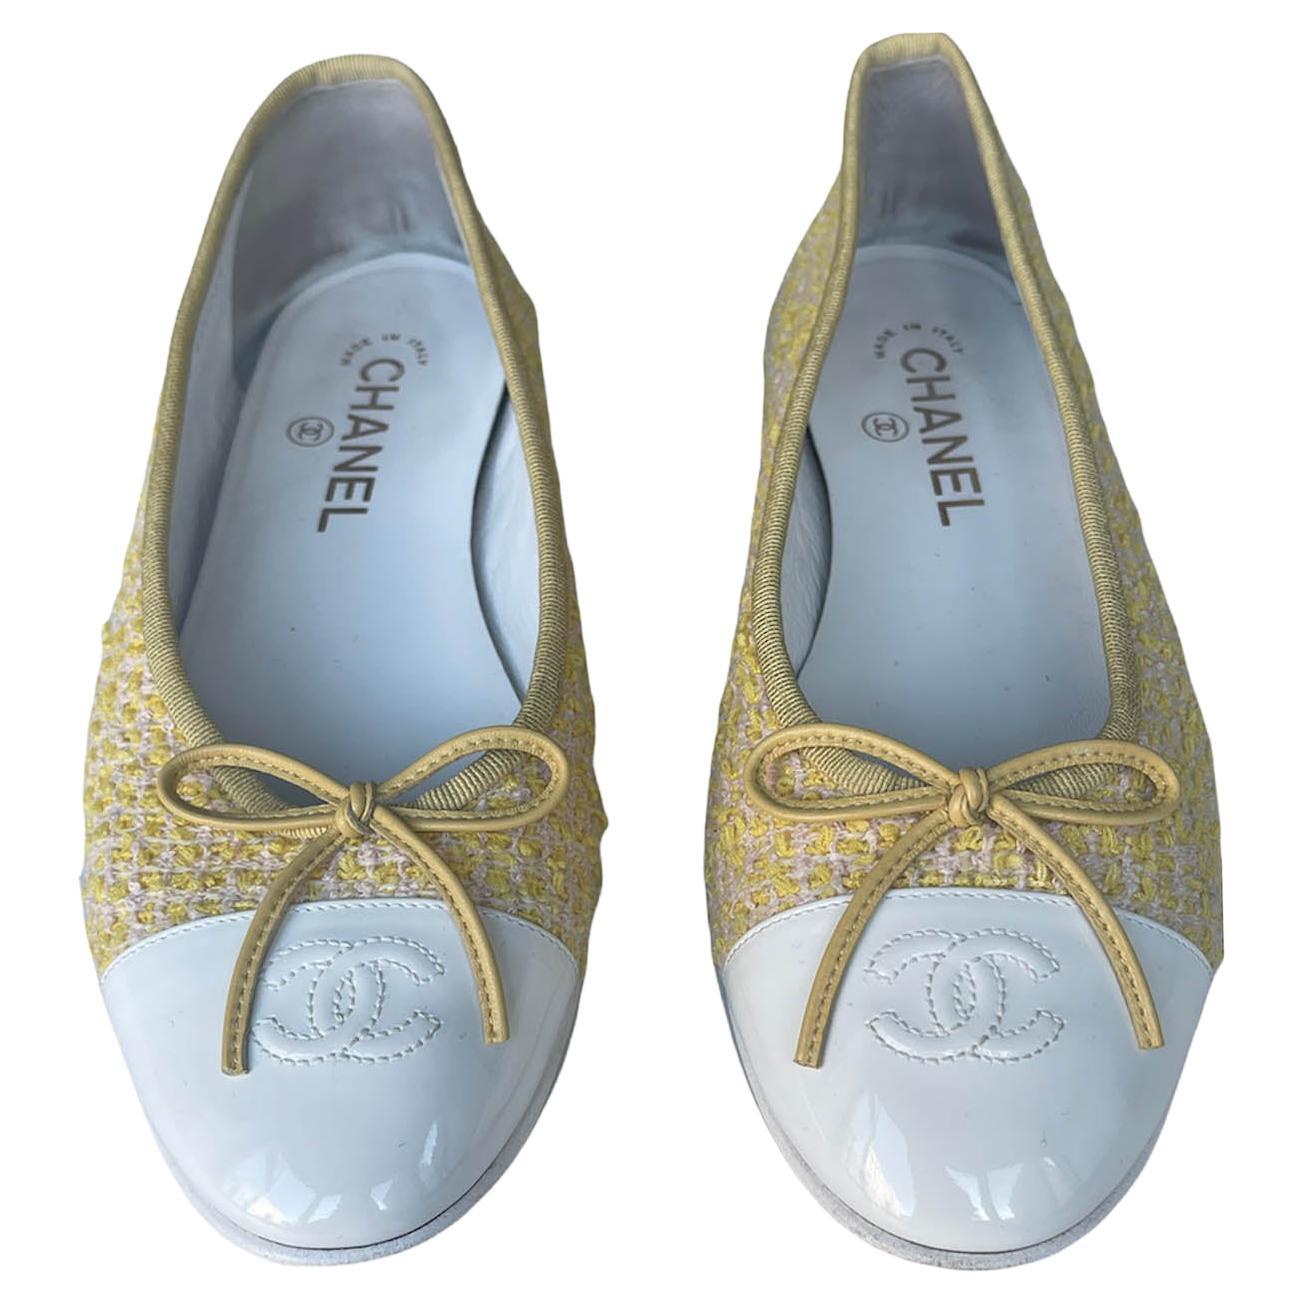 Chanel 2021 Yellow Tweed/ White Patent CC Ballerina Flats sz 39 rt. $850 For Sale at